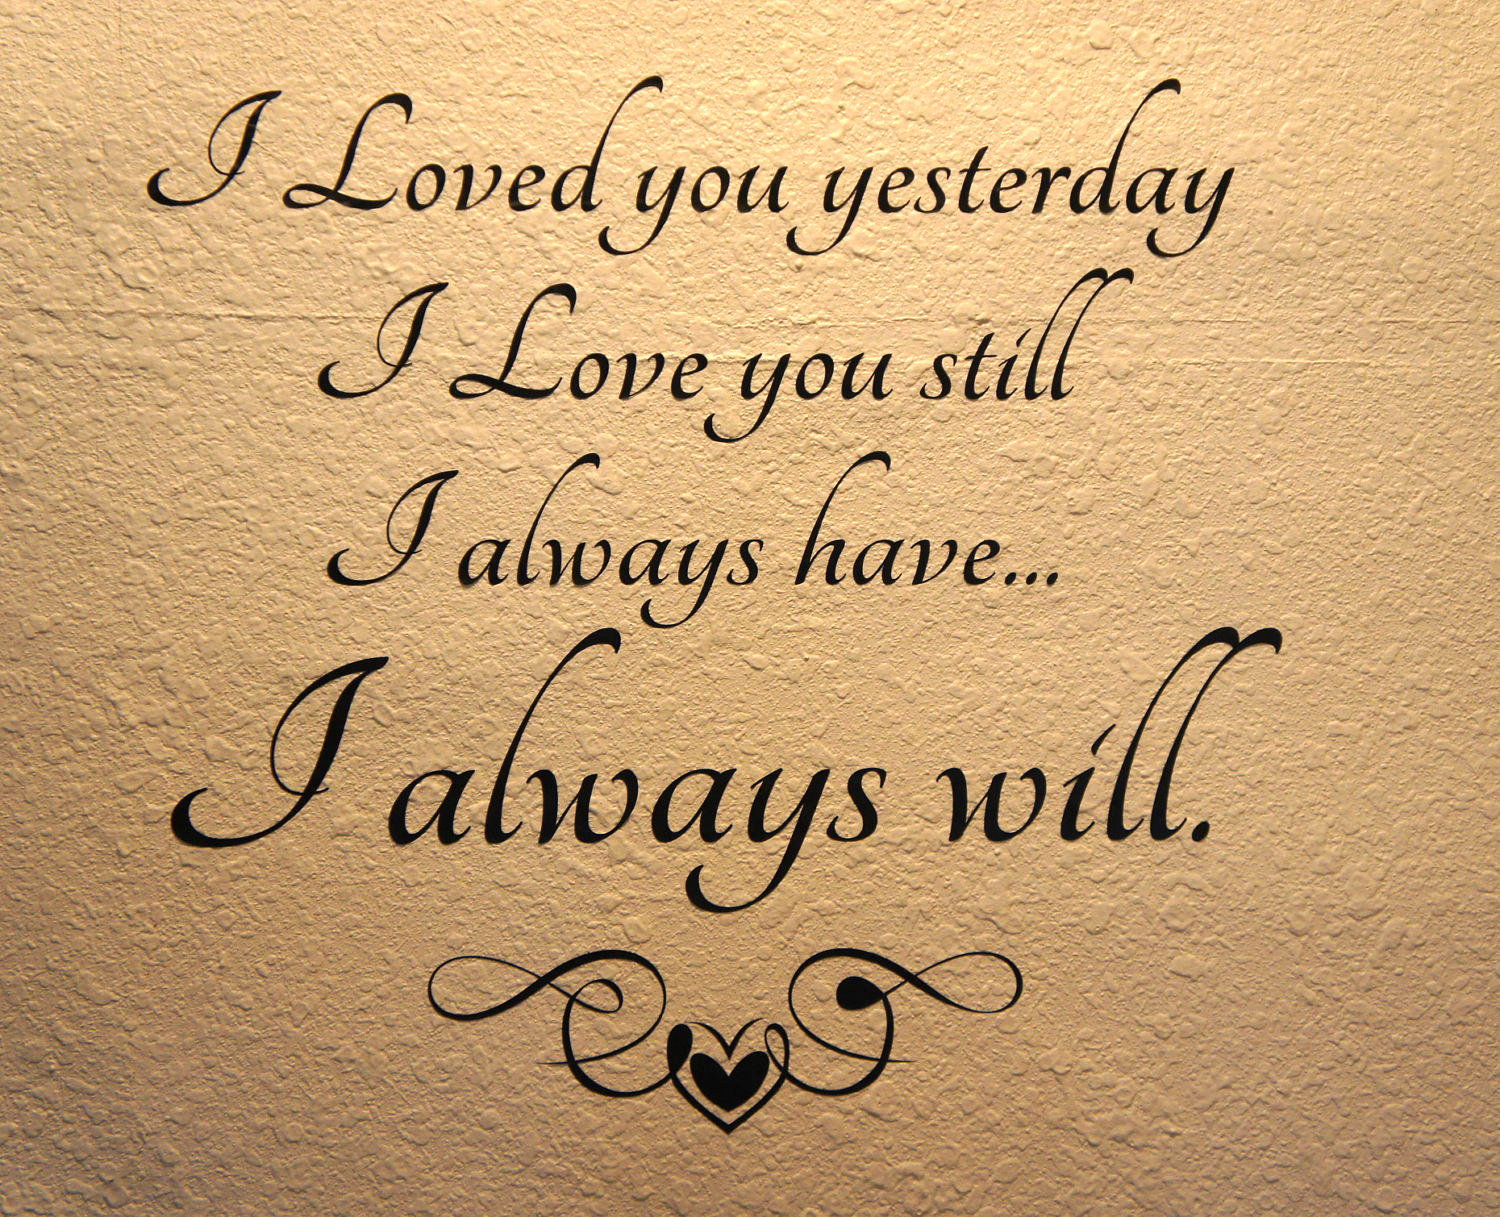 30 Love You Quotes For Your Loved Ones – The WoW Style